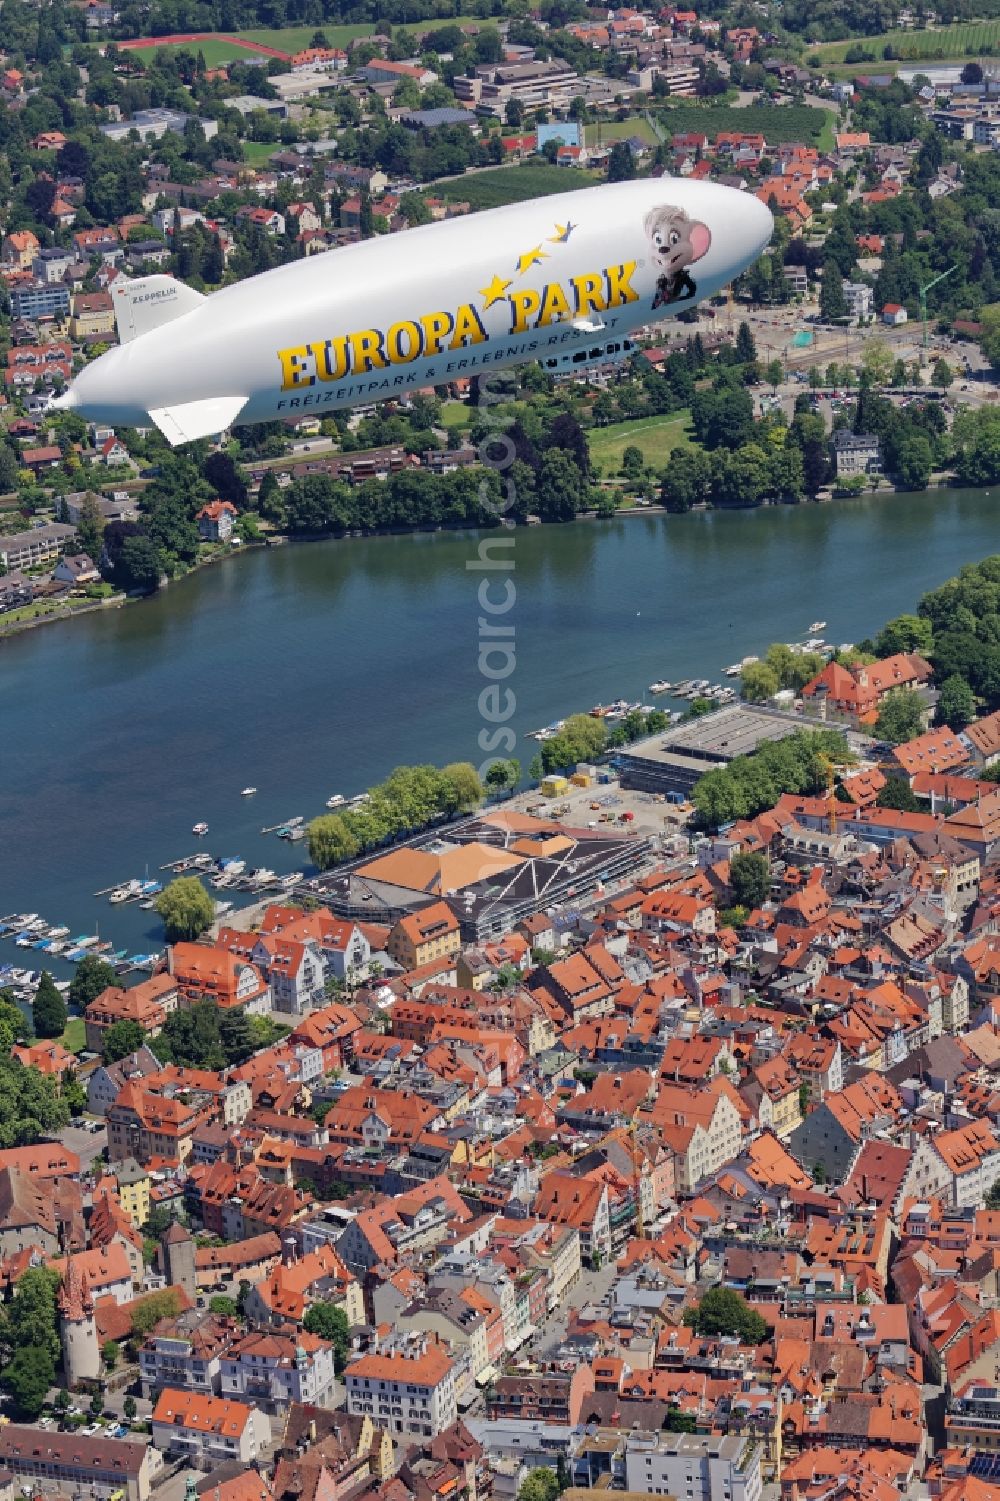 Lindau (Bodensee) from the bird's eye view: Zeppelin NT on the island of Lindau in Bavaria. The semi-rigid airship D-LZFN Friedrichshafen on a tourist flight with passengers